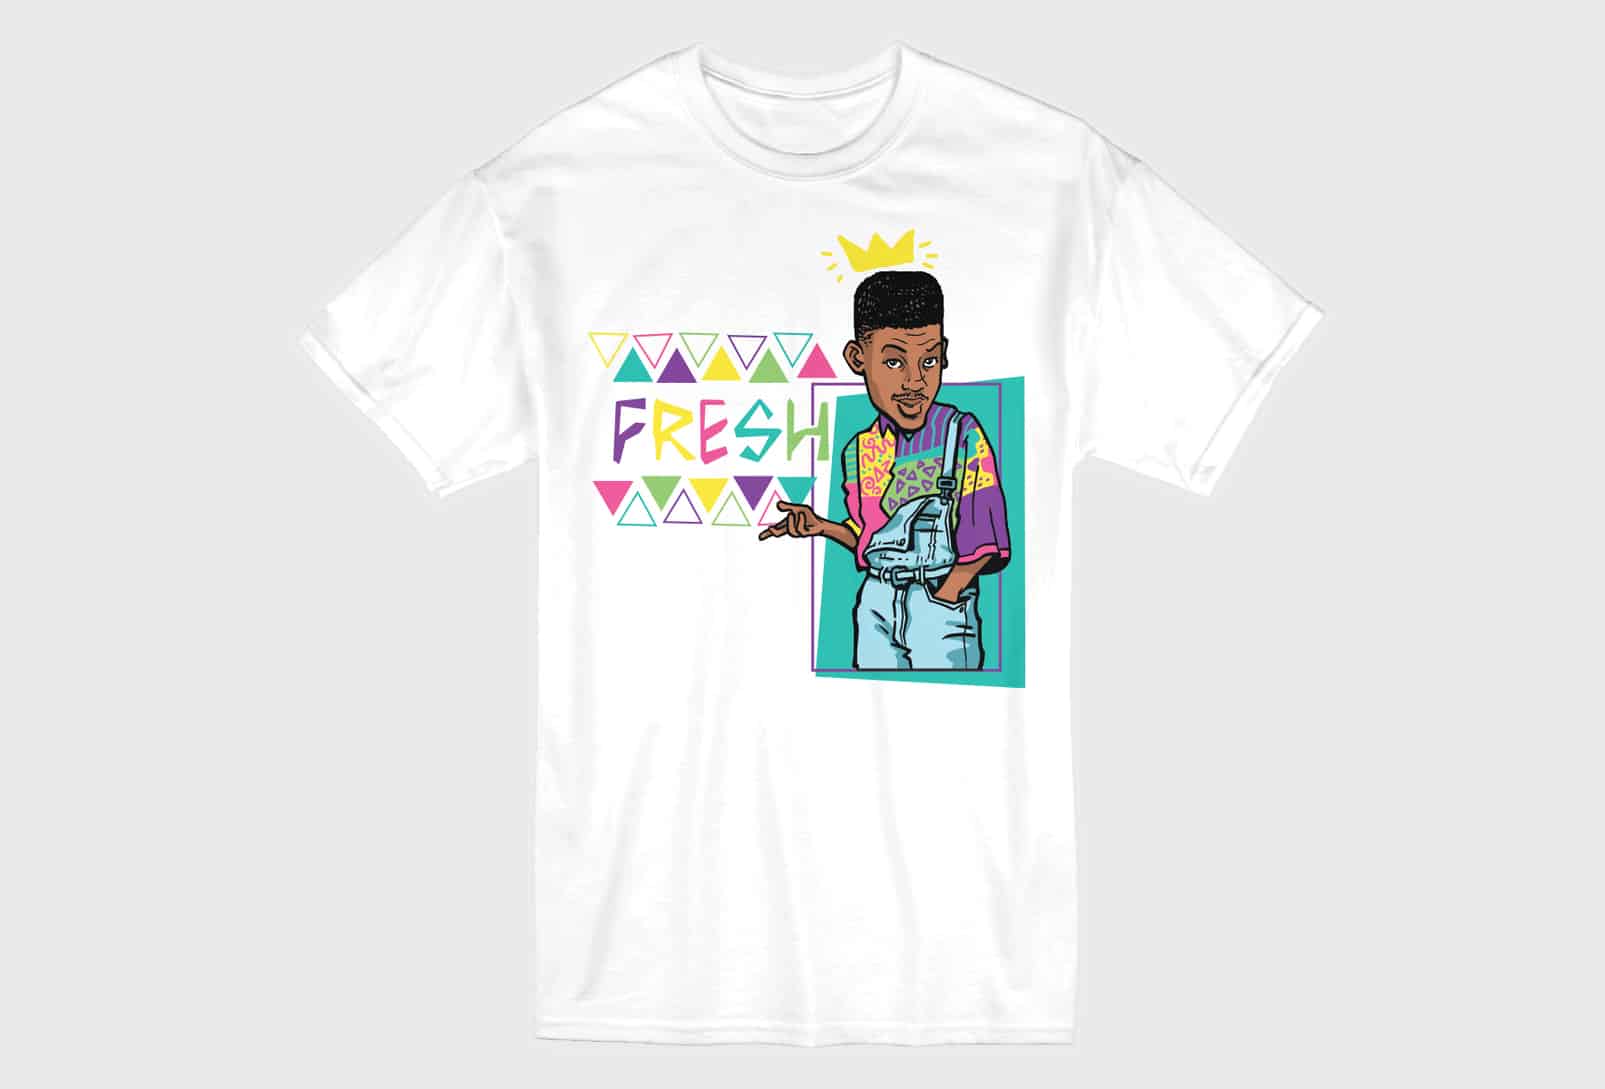 Fresh Prince' clothing brand releases limited-edition collection to  celebrate show's 30th anniversary